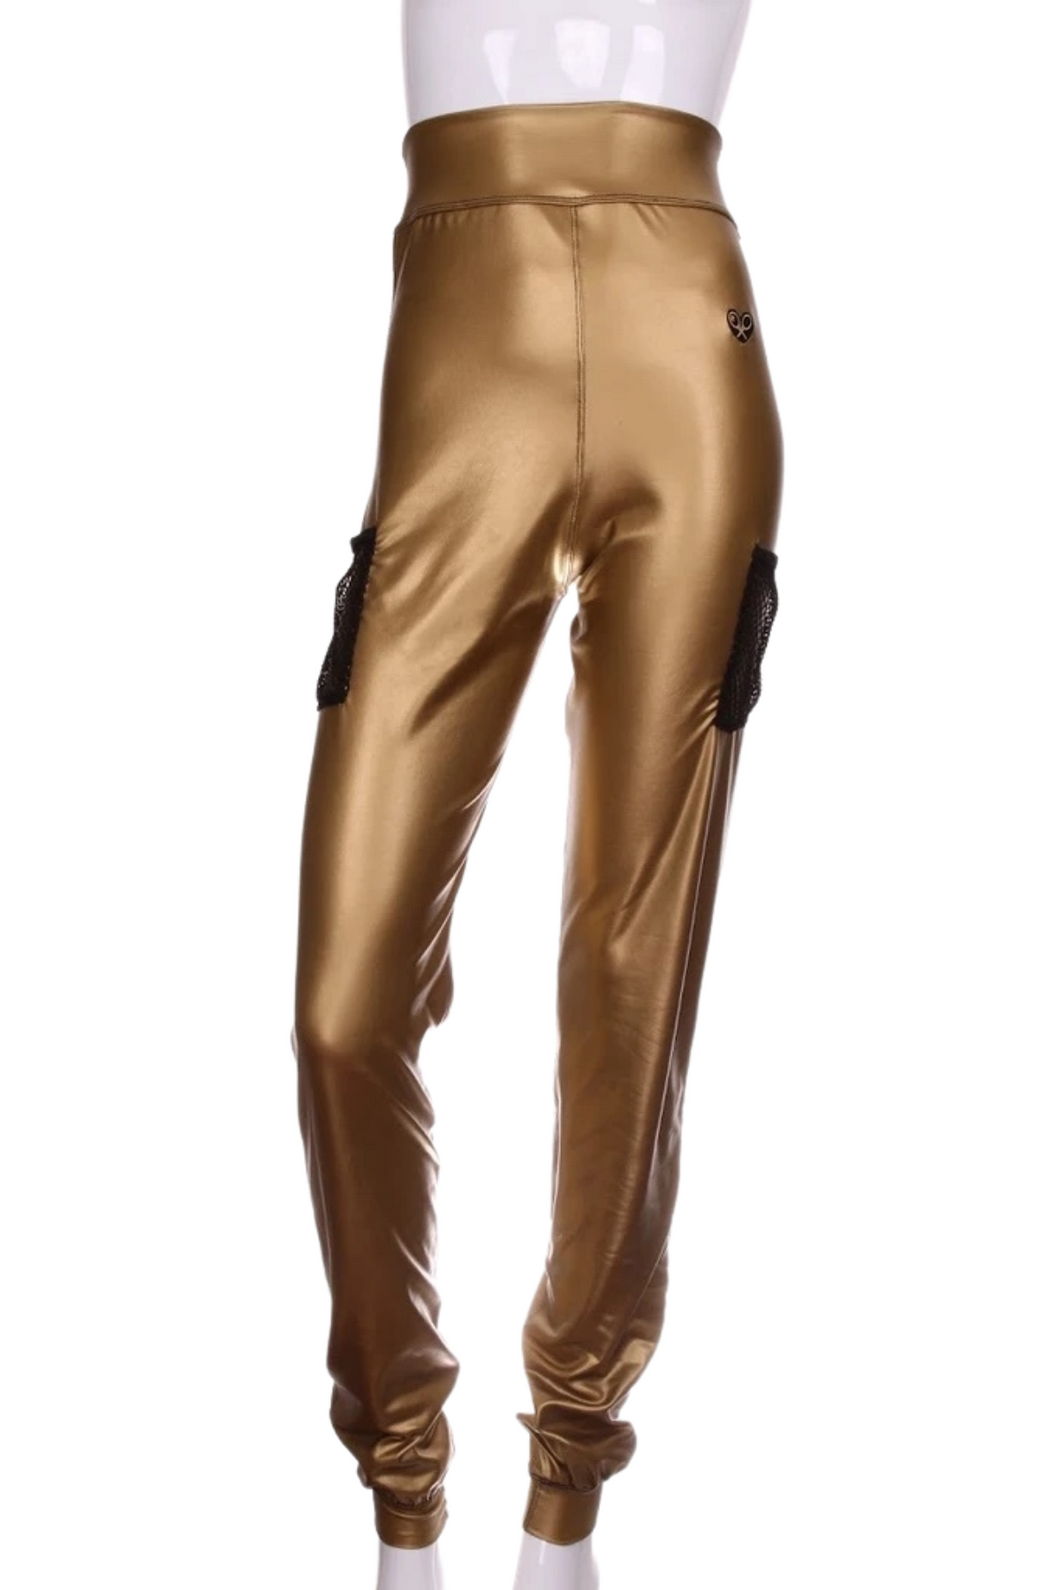 Pleather Gold High + Long Warm Up Pants - I LOVE MY DOUBLES PARTNER!!!